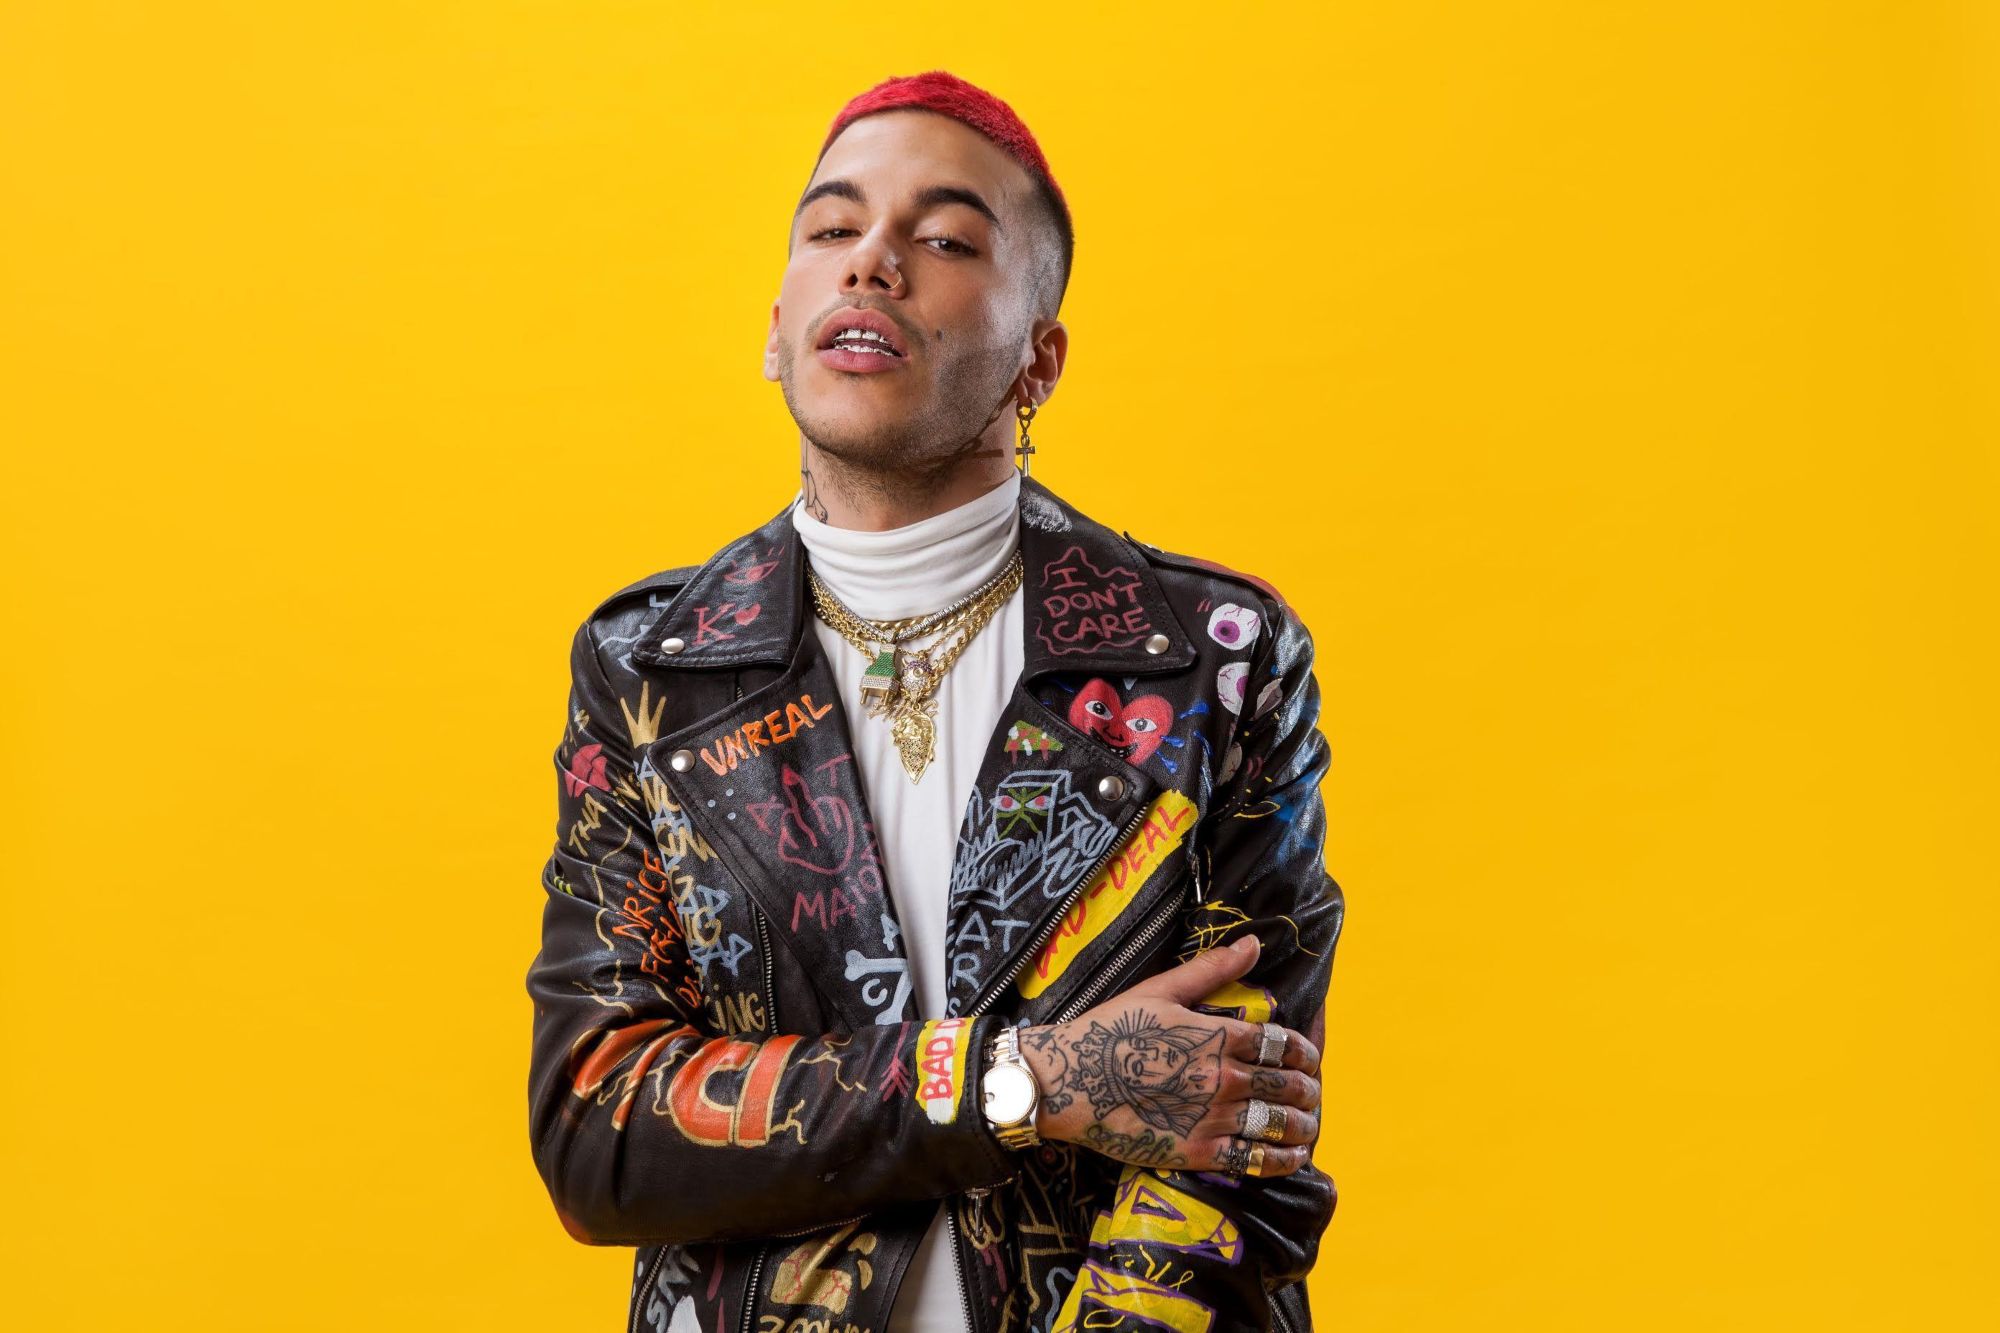 12-mind-blowing-facts-about-sfera-ebbasta